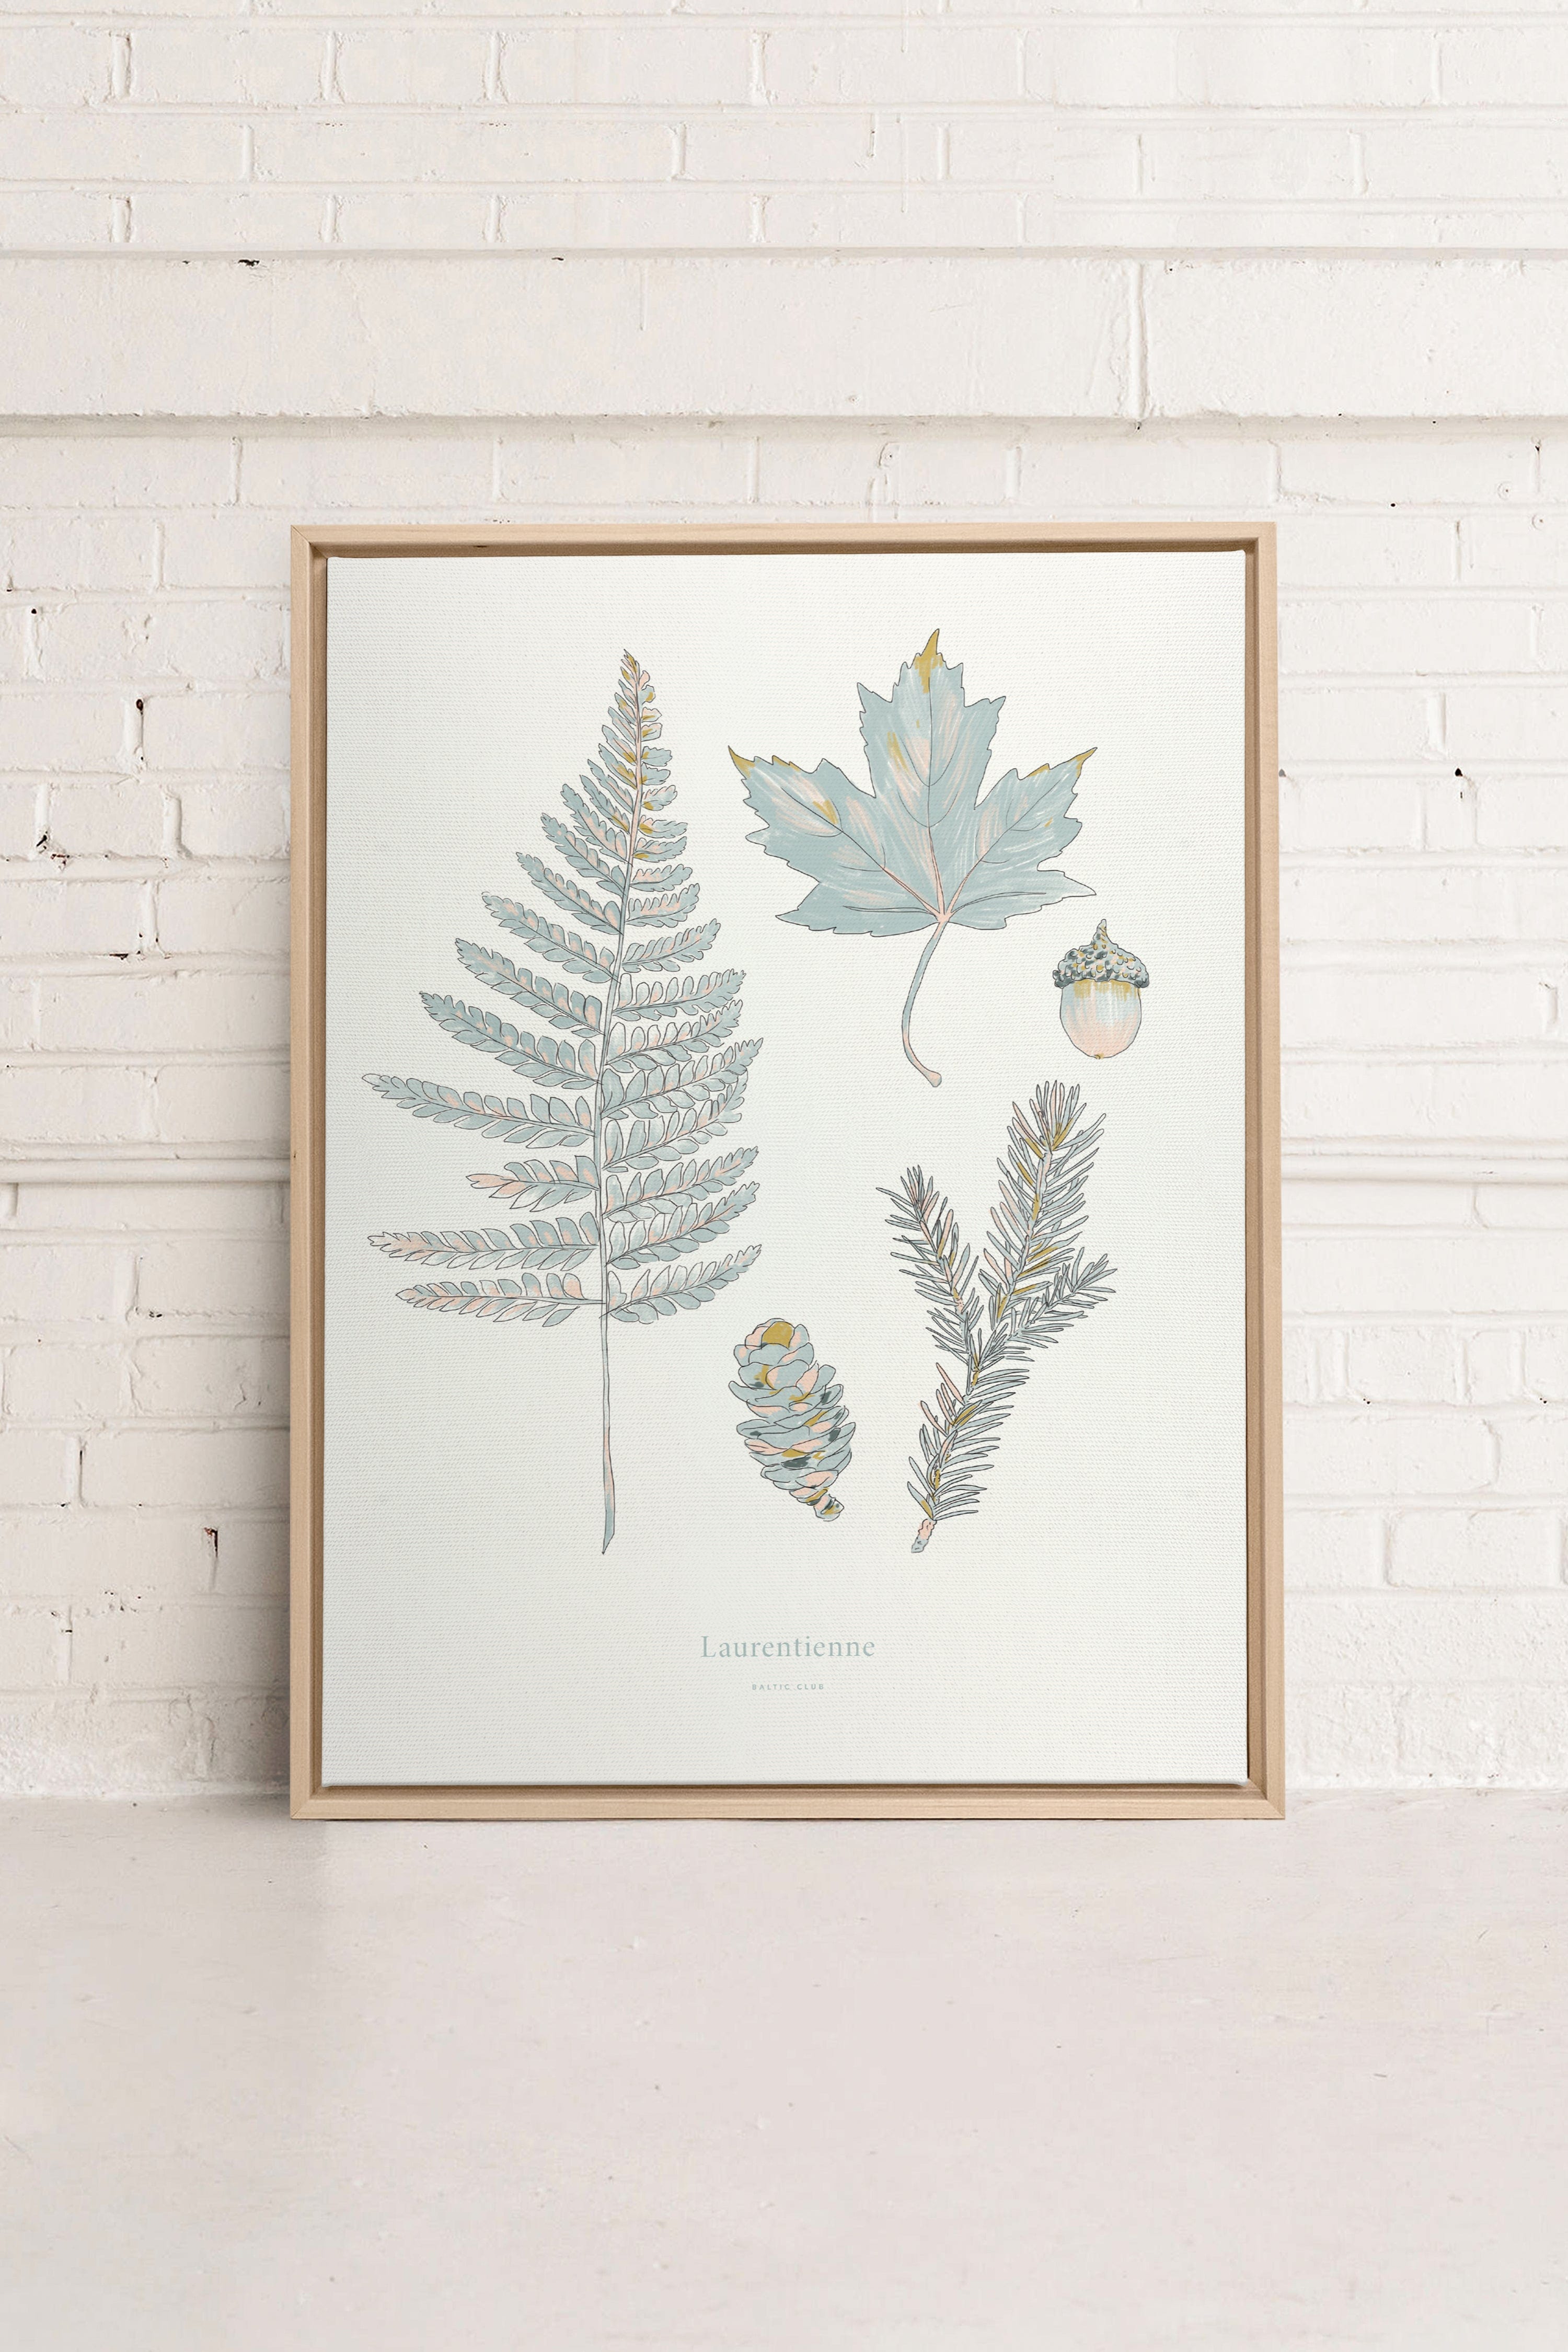 Laurentian Forest - Printed illustration on canvas